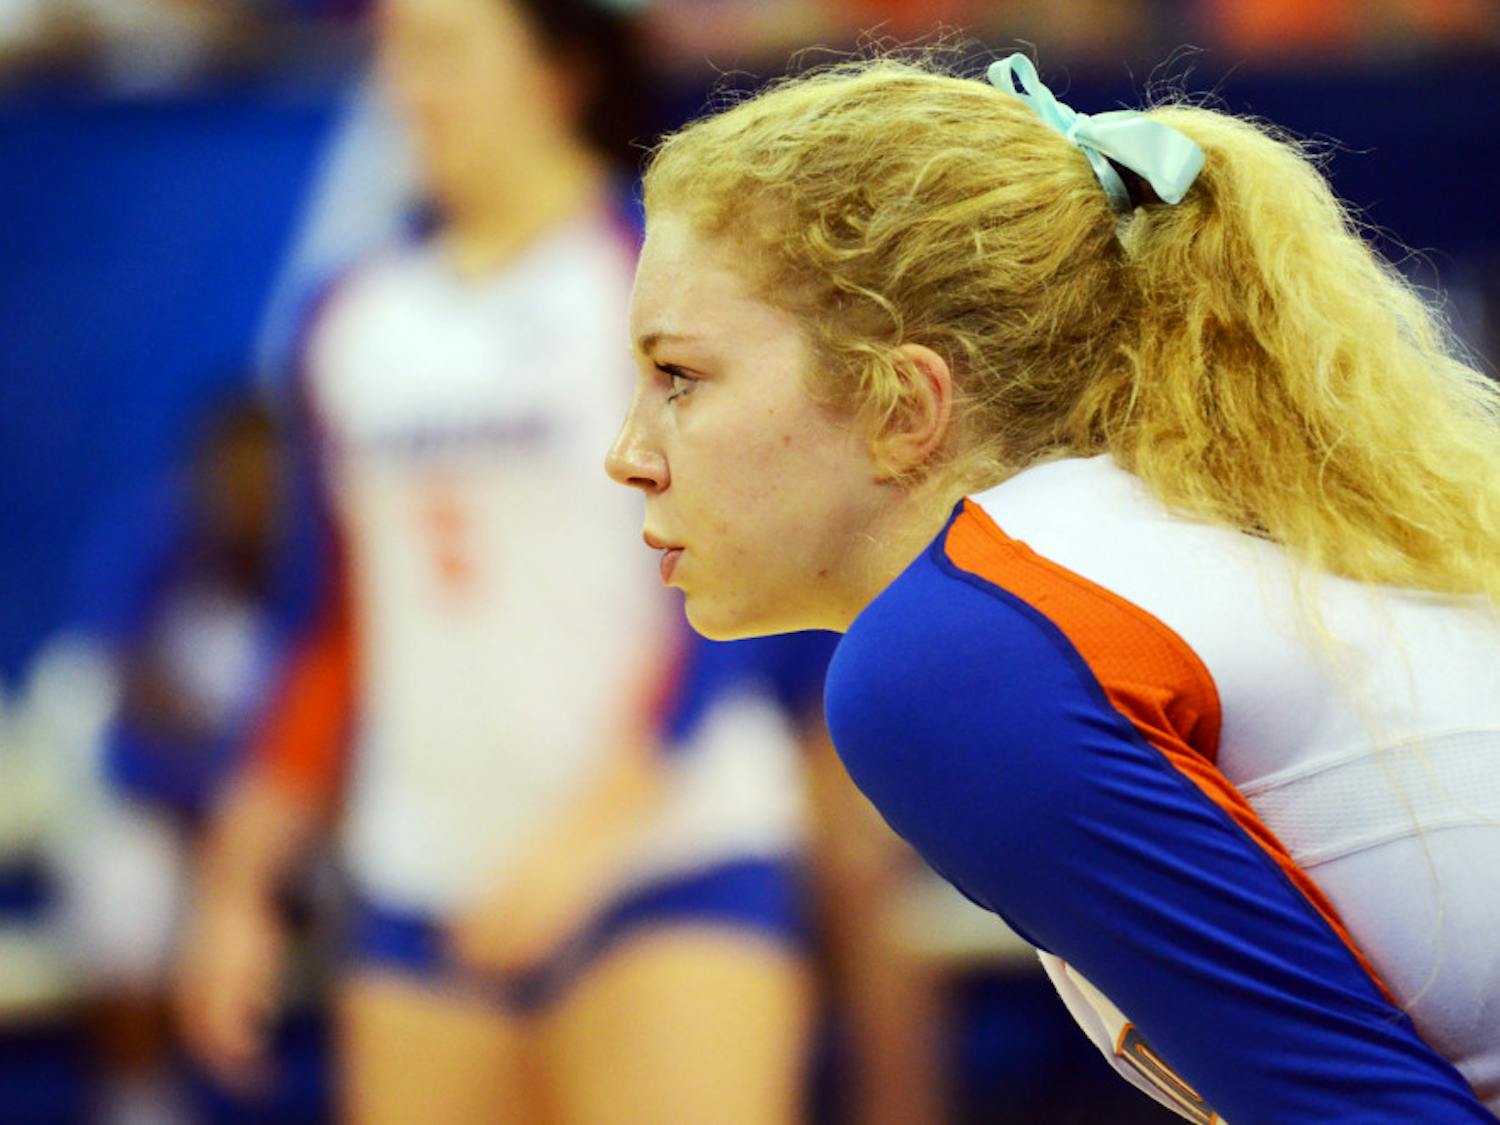 Carli Snyder awaits a play during Florida's 3-1 win against Miami in the second round of the NCAA Tournament on Saturday in the O'Connell Center.